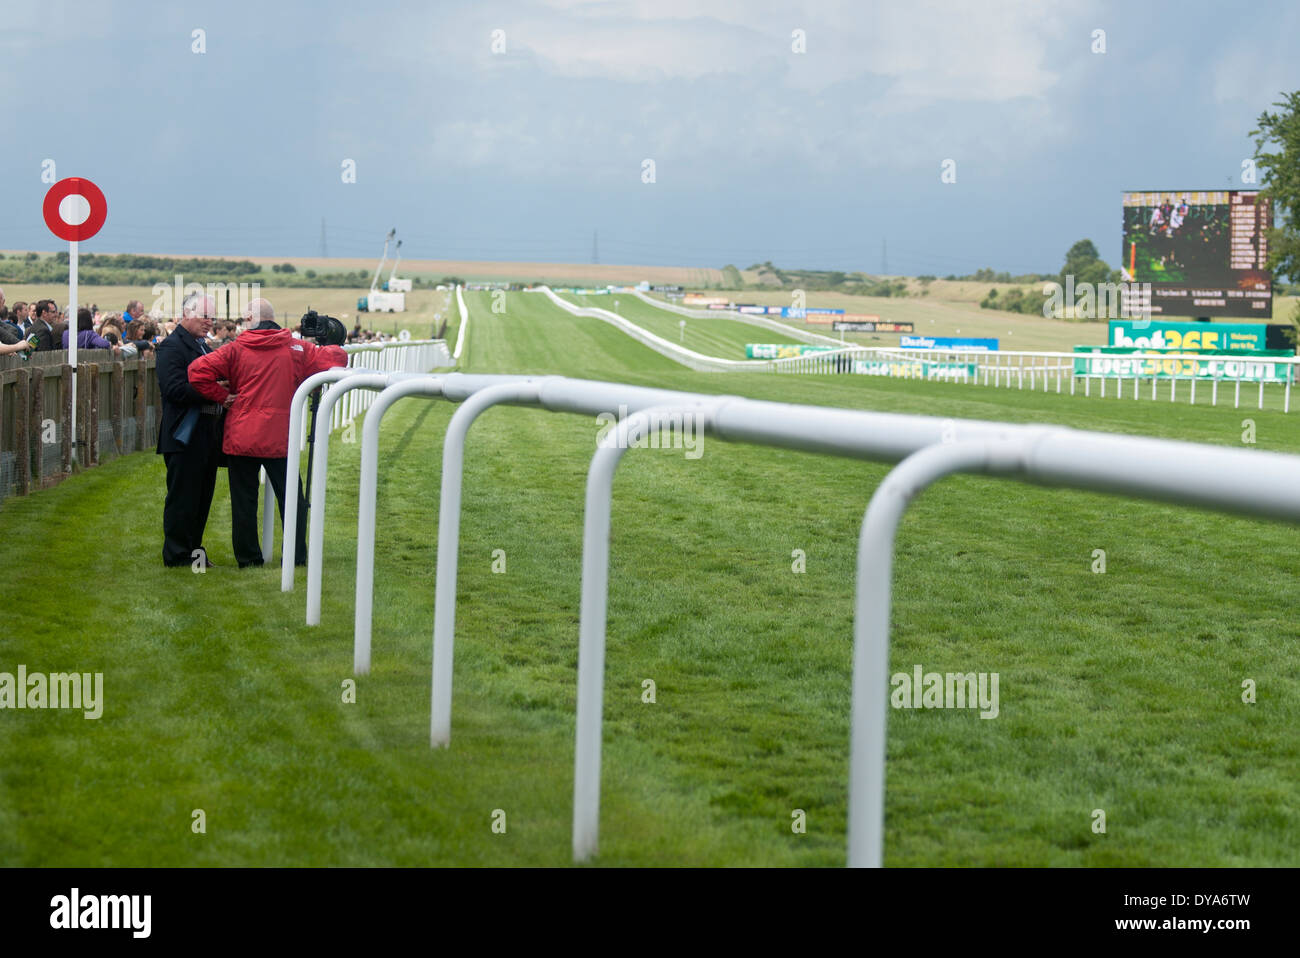 group of bystanders next to a race course waiting for horses to pass, red jacket green lawn, white fence, cloudy sky Stock Photo